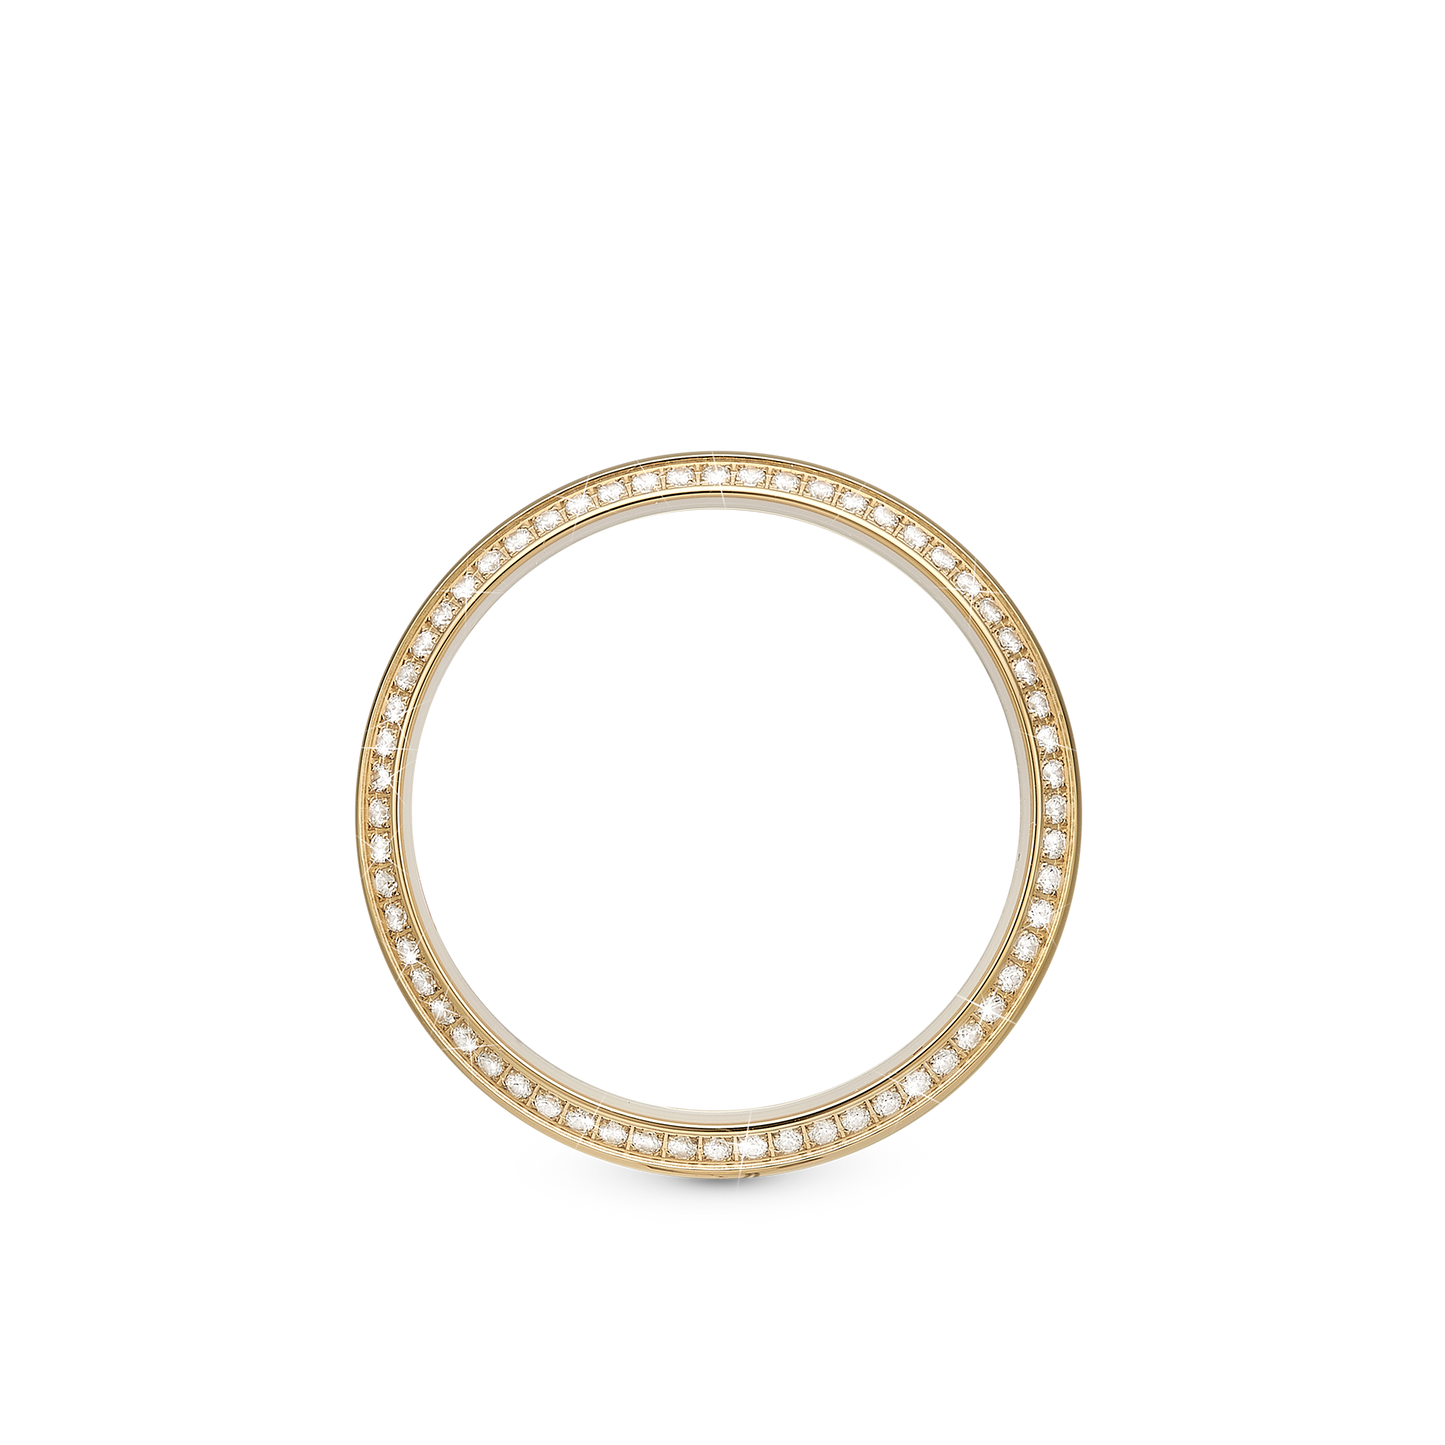 Top Bezel, Goldplated with 60 white CZ